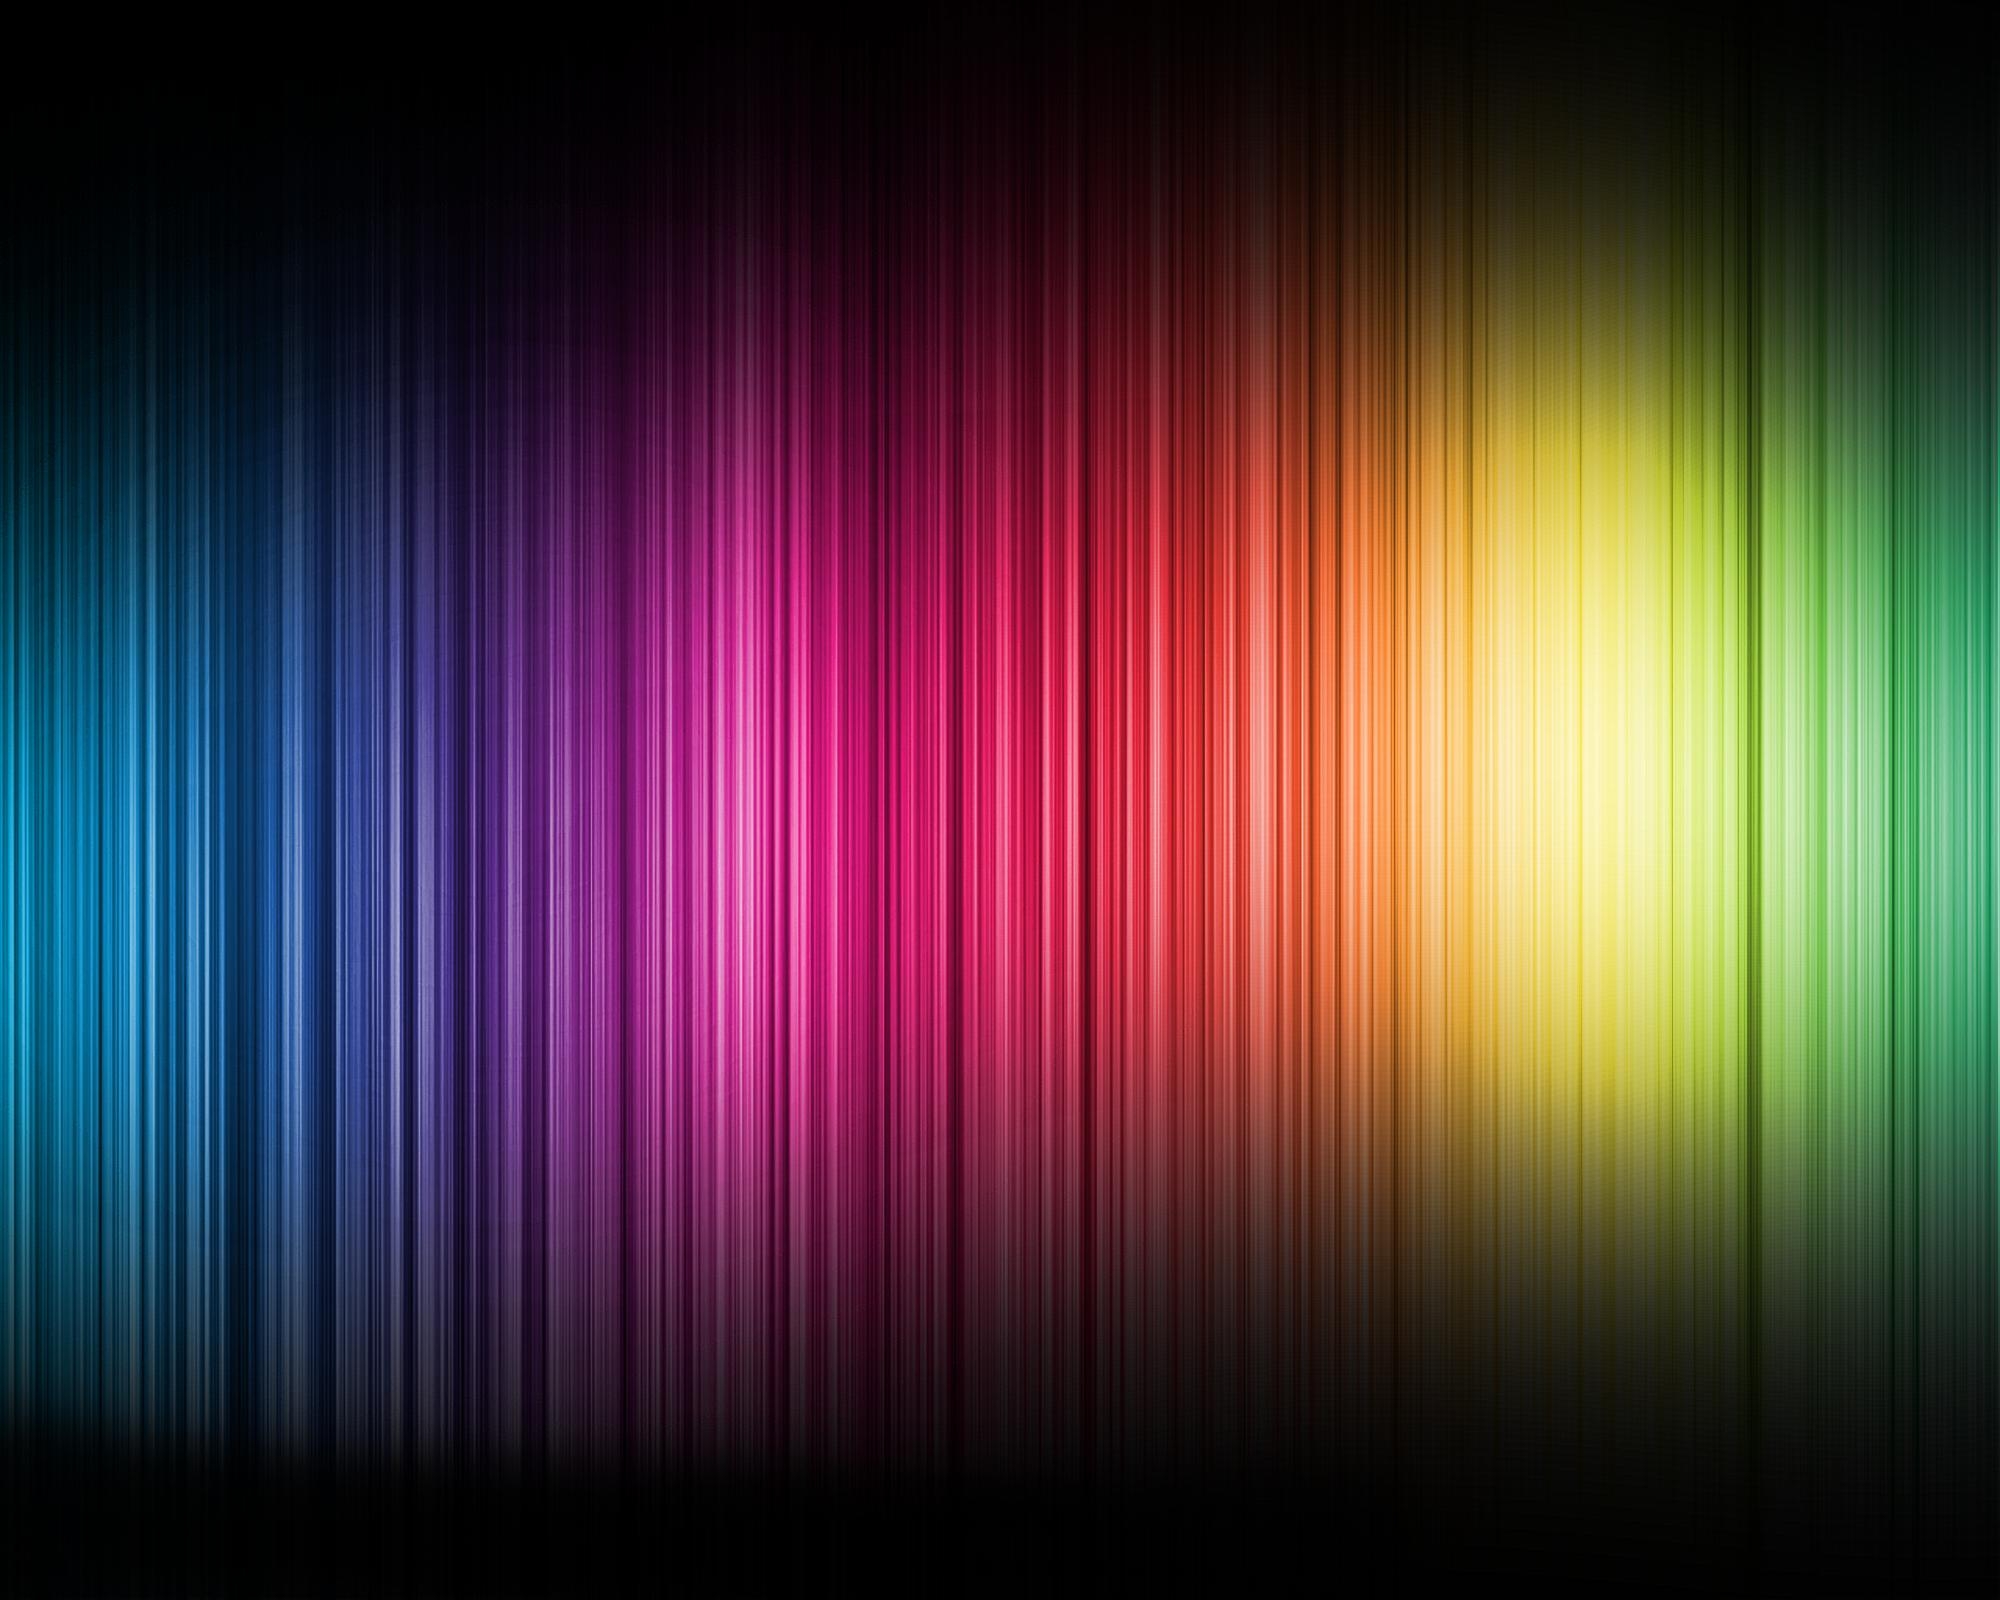 color, vertical, abstract, stripes, streaks, spectrum